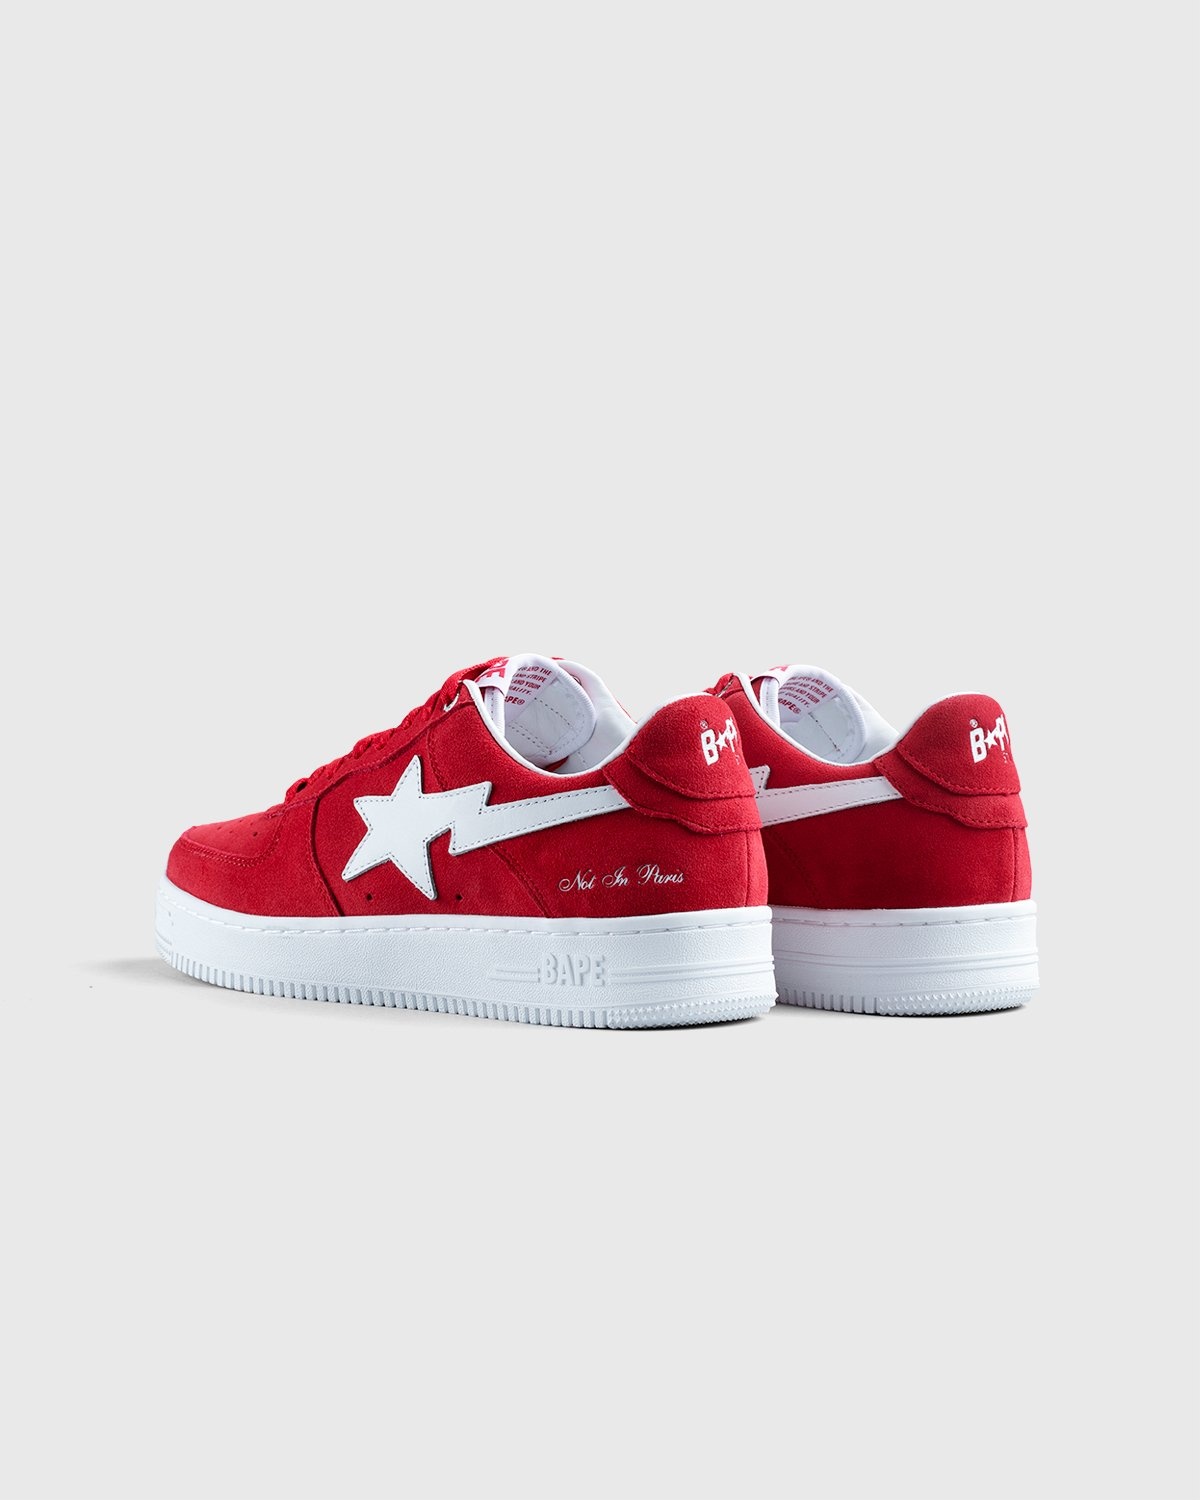 BAPE x Highsnobiety – BAPE STA Red - Low Top Sneakers - Red - Image 3